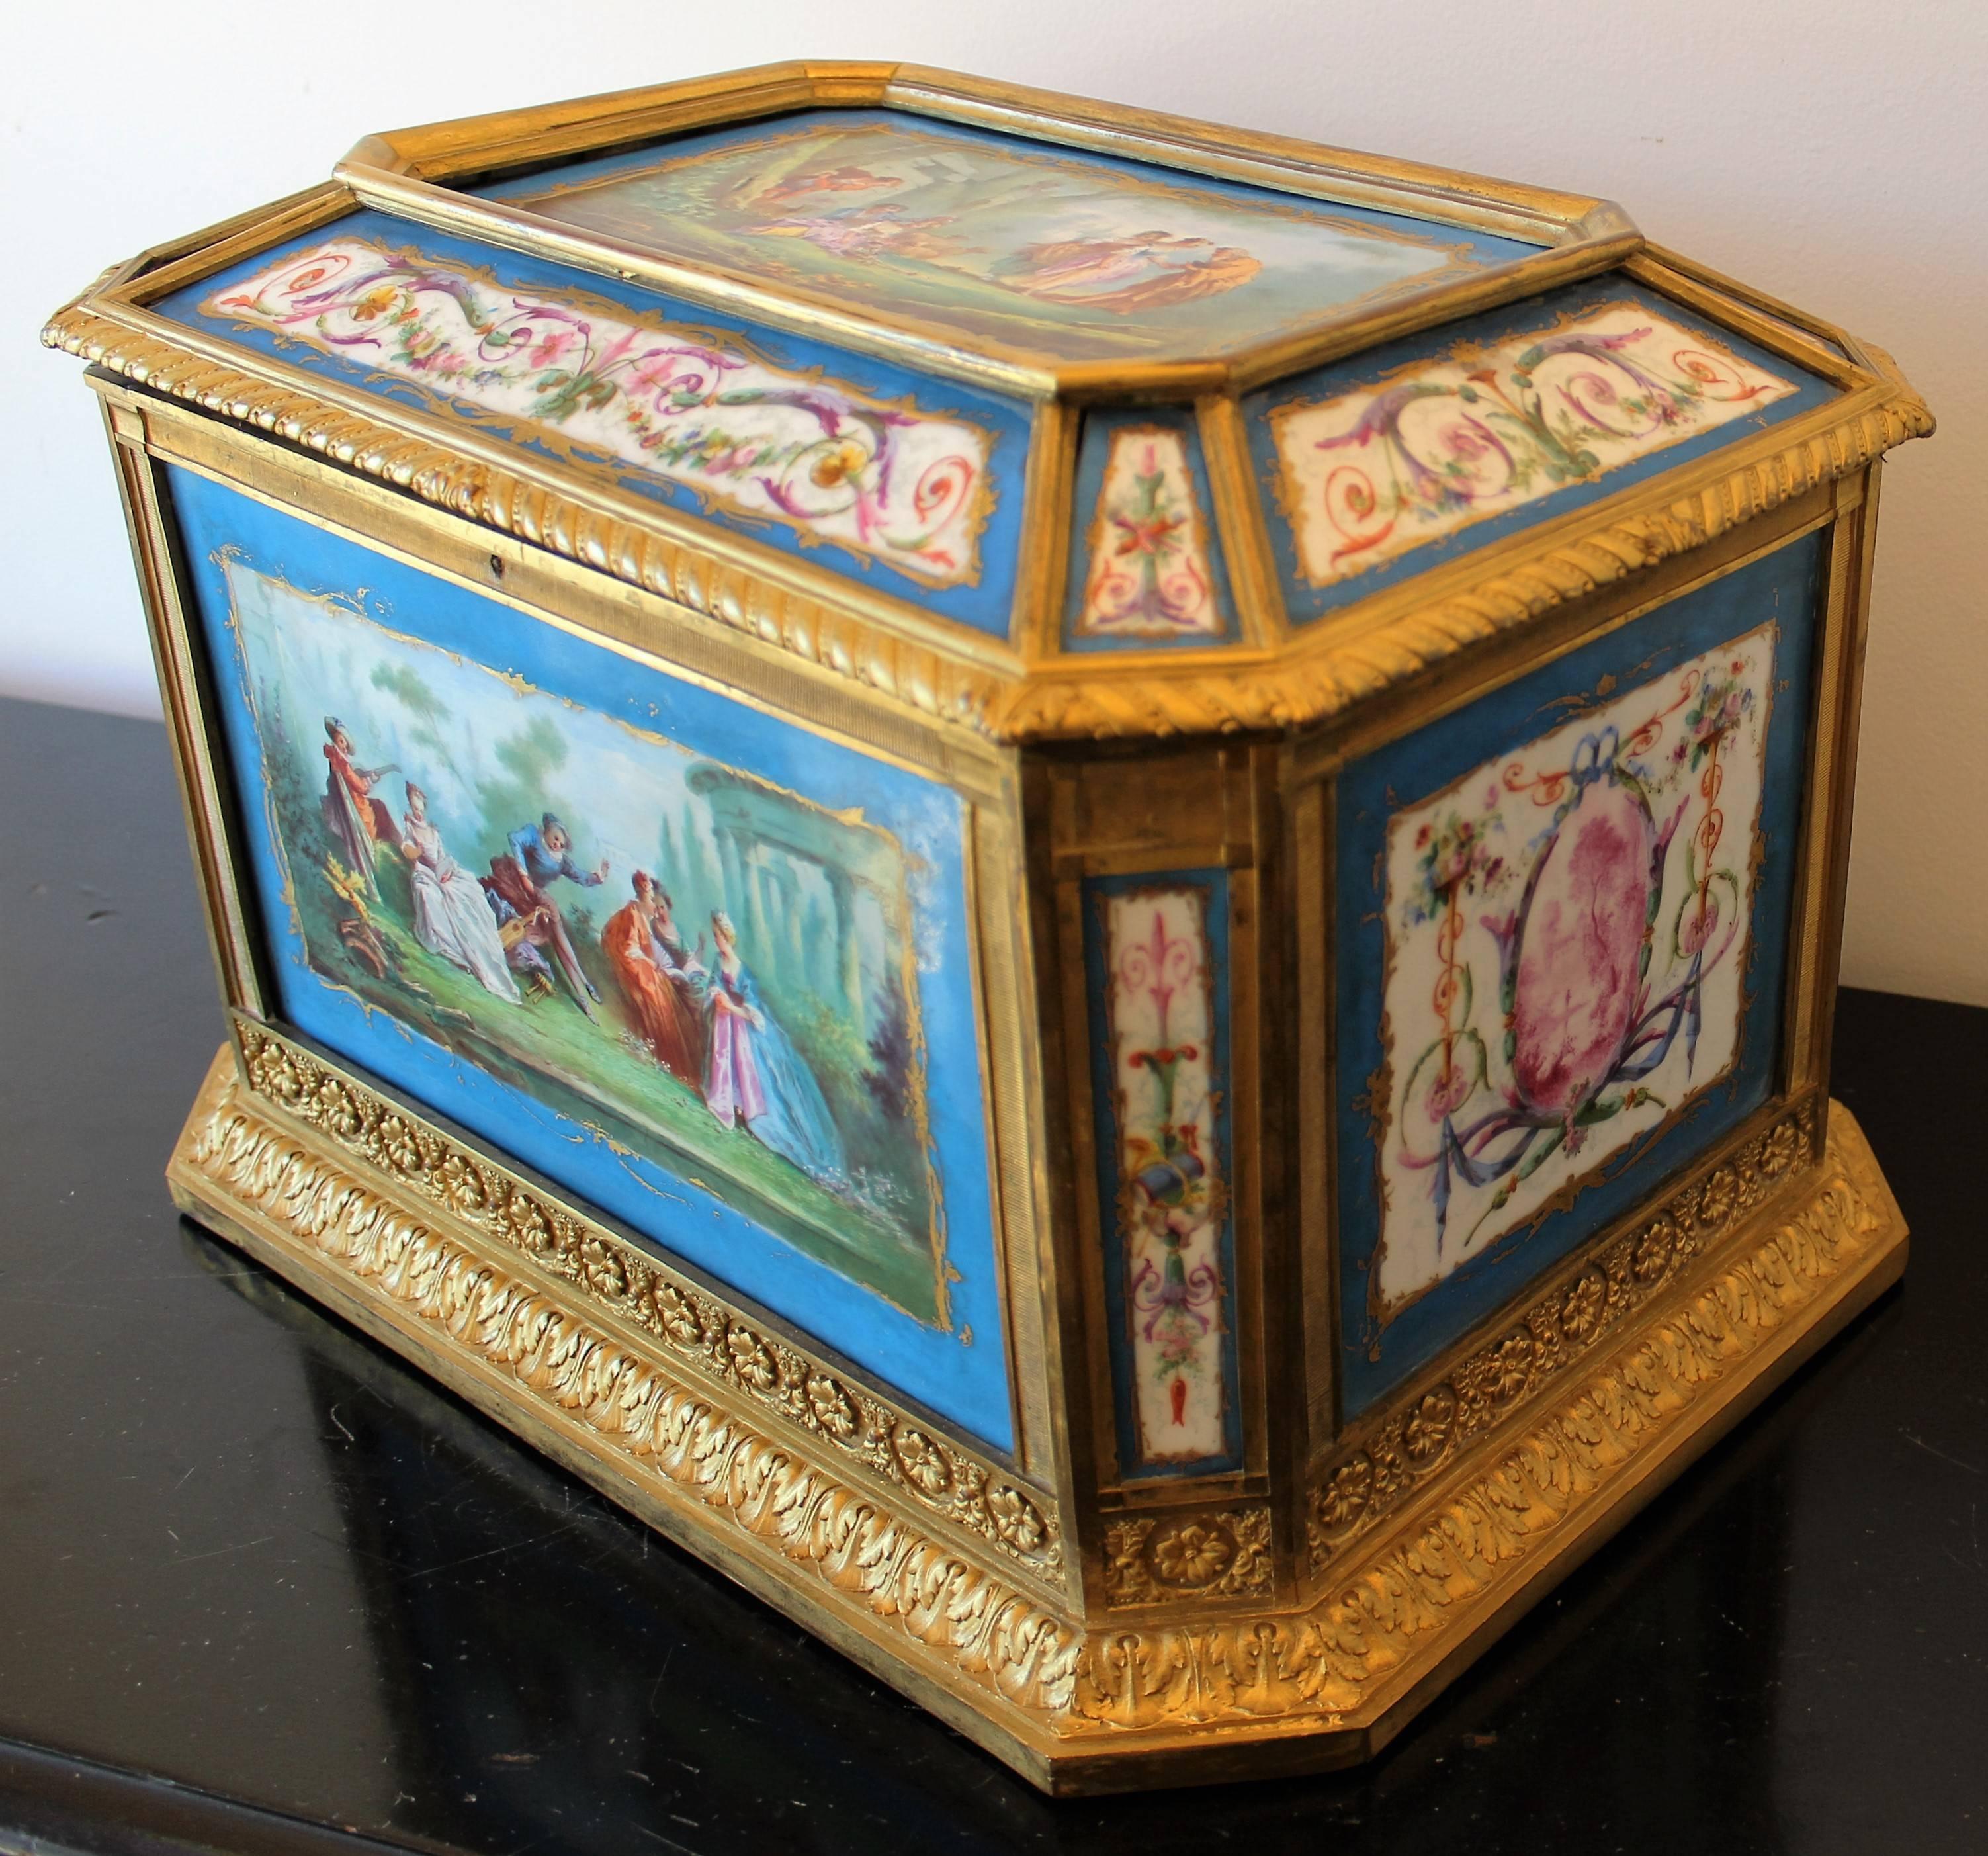 A French Sevres style porcelain casket with gilt bronze mounts. This piece features seventeen hand-painted porcelain plaques within a stunning gilt bronze framework.